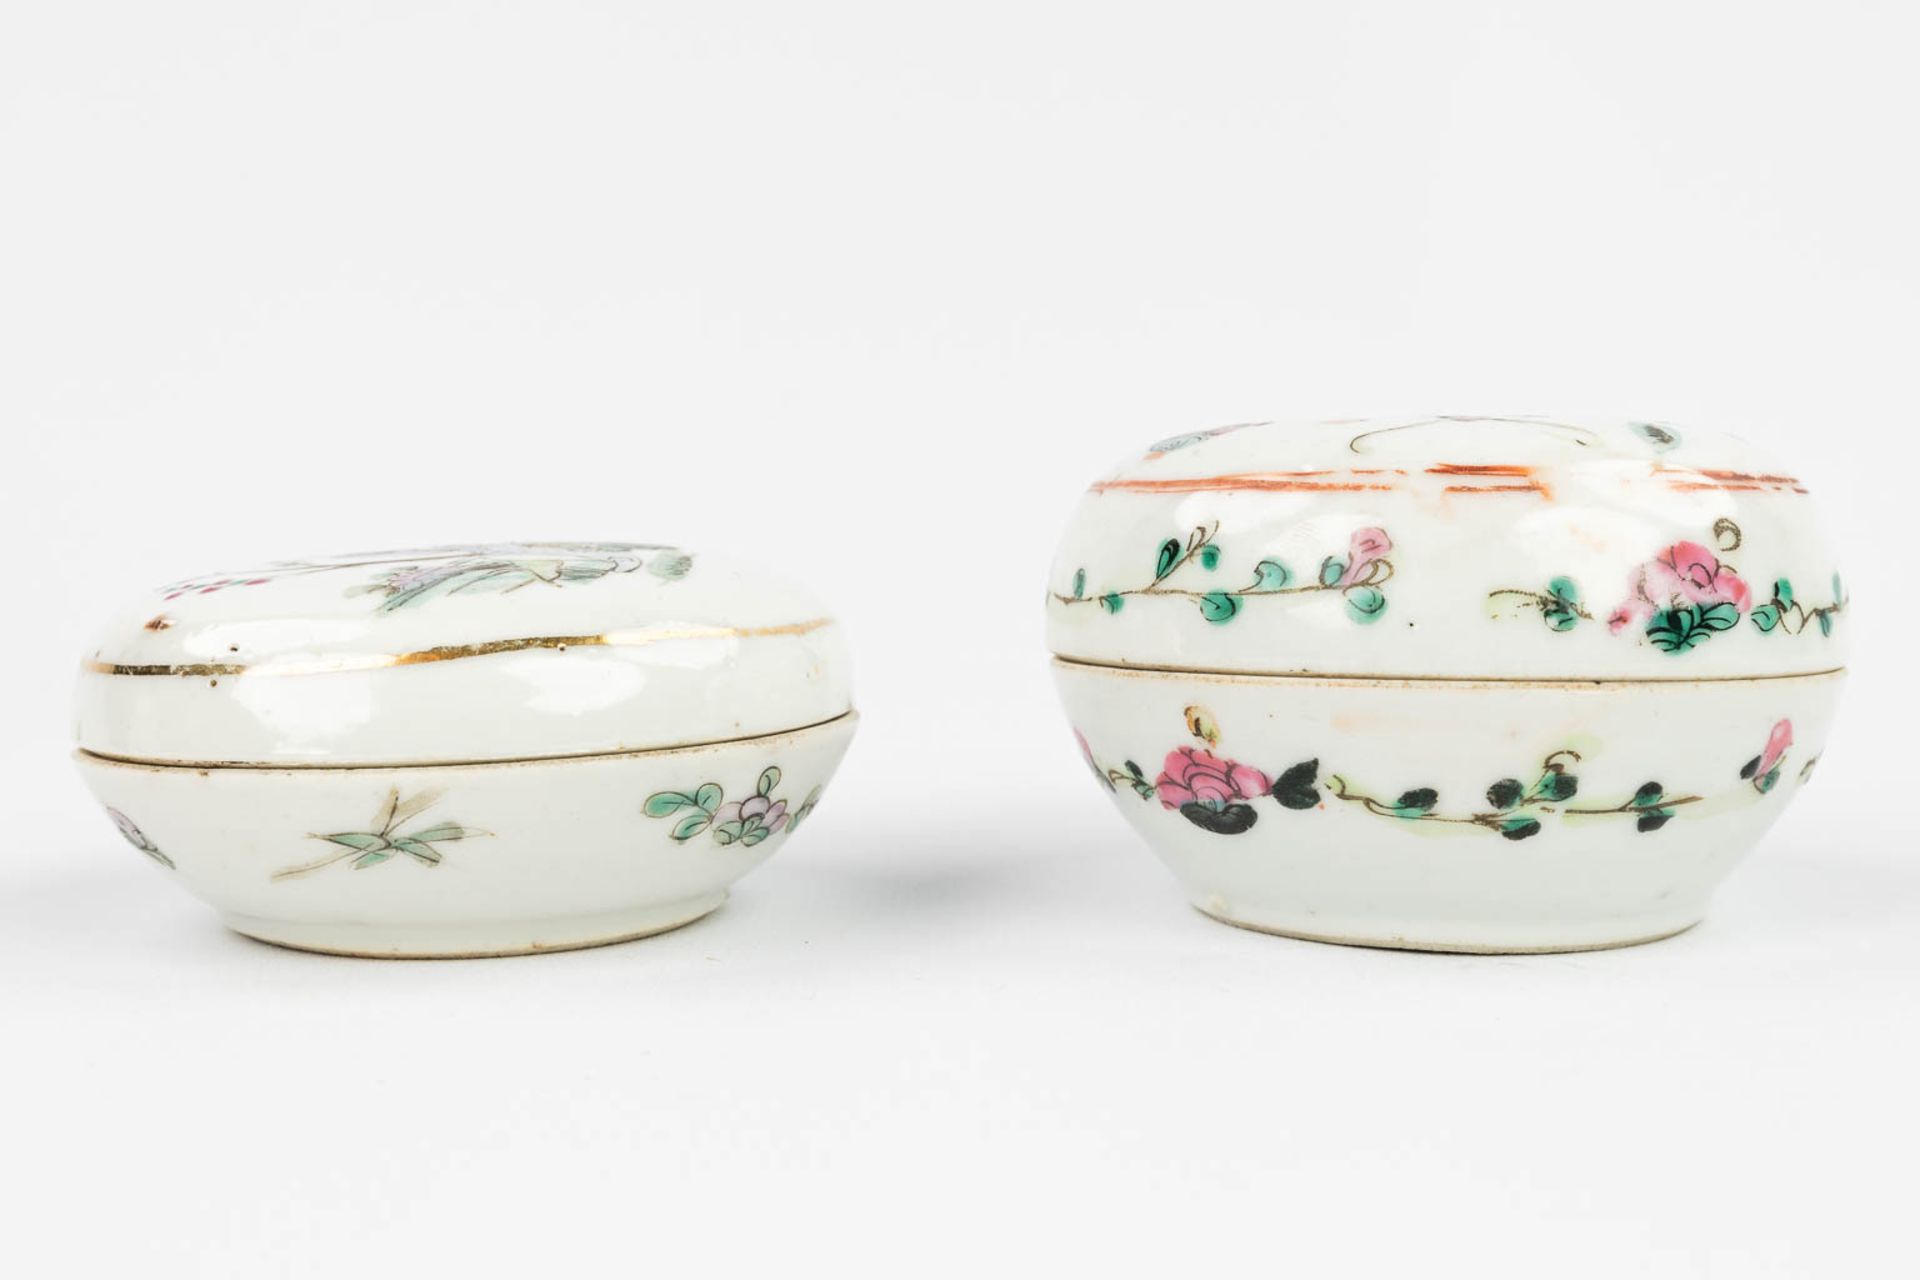 AÊset of 2 Chinese pots with lid, with hand-painted decor and made of porcelain (5 x 8,5 cm) - Image 16 of 18